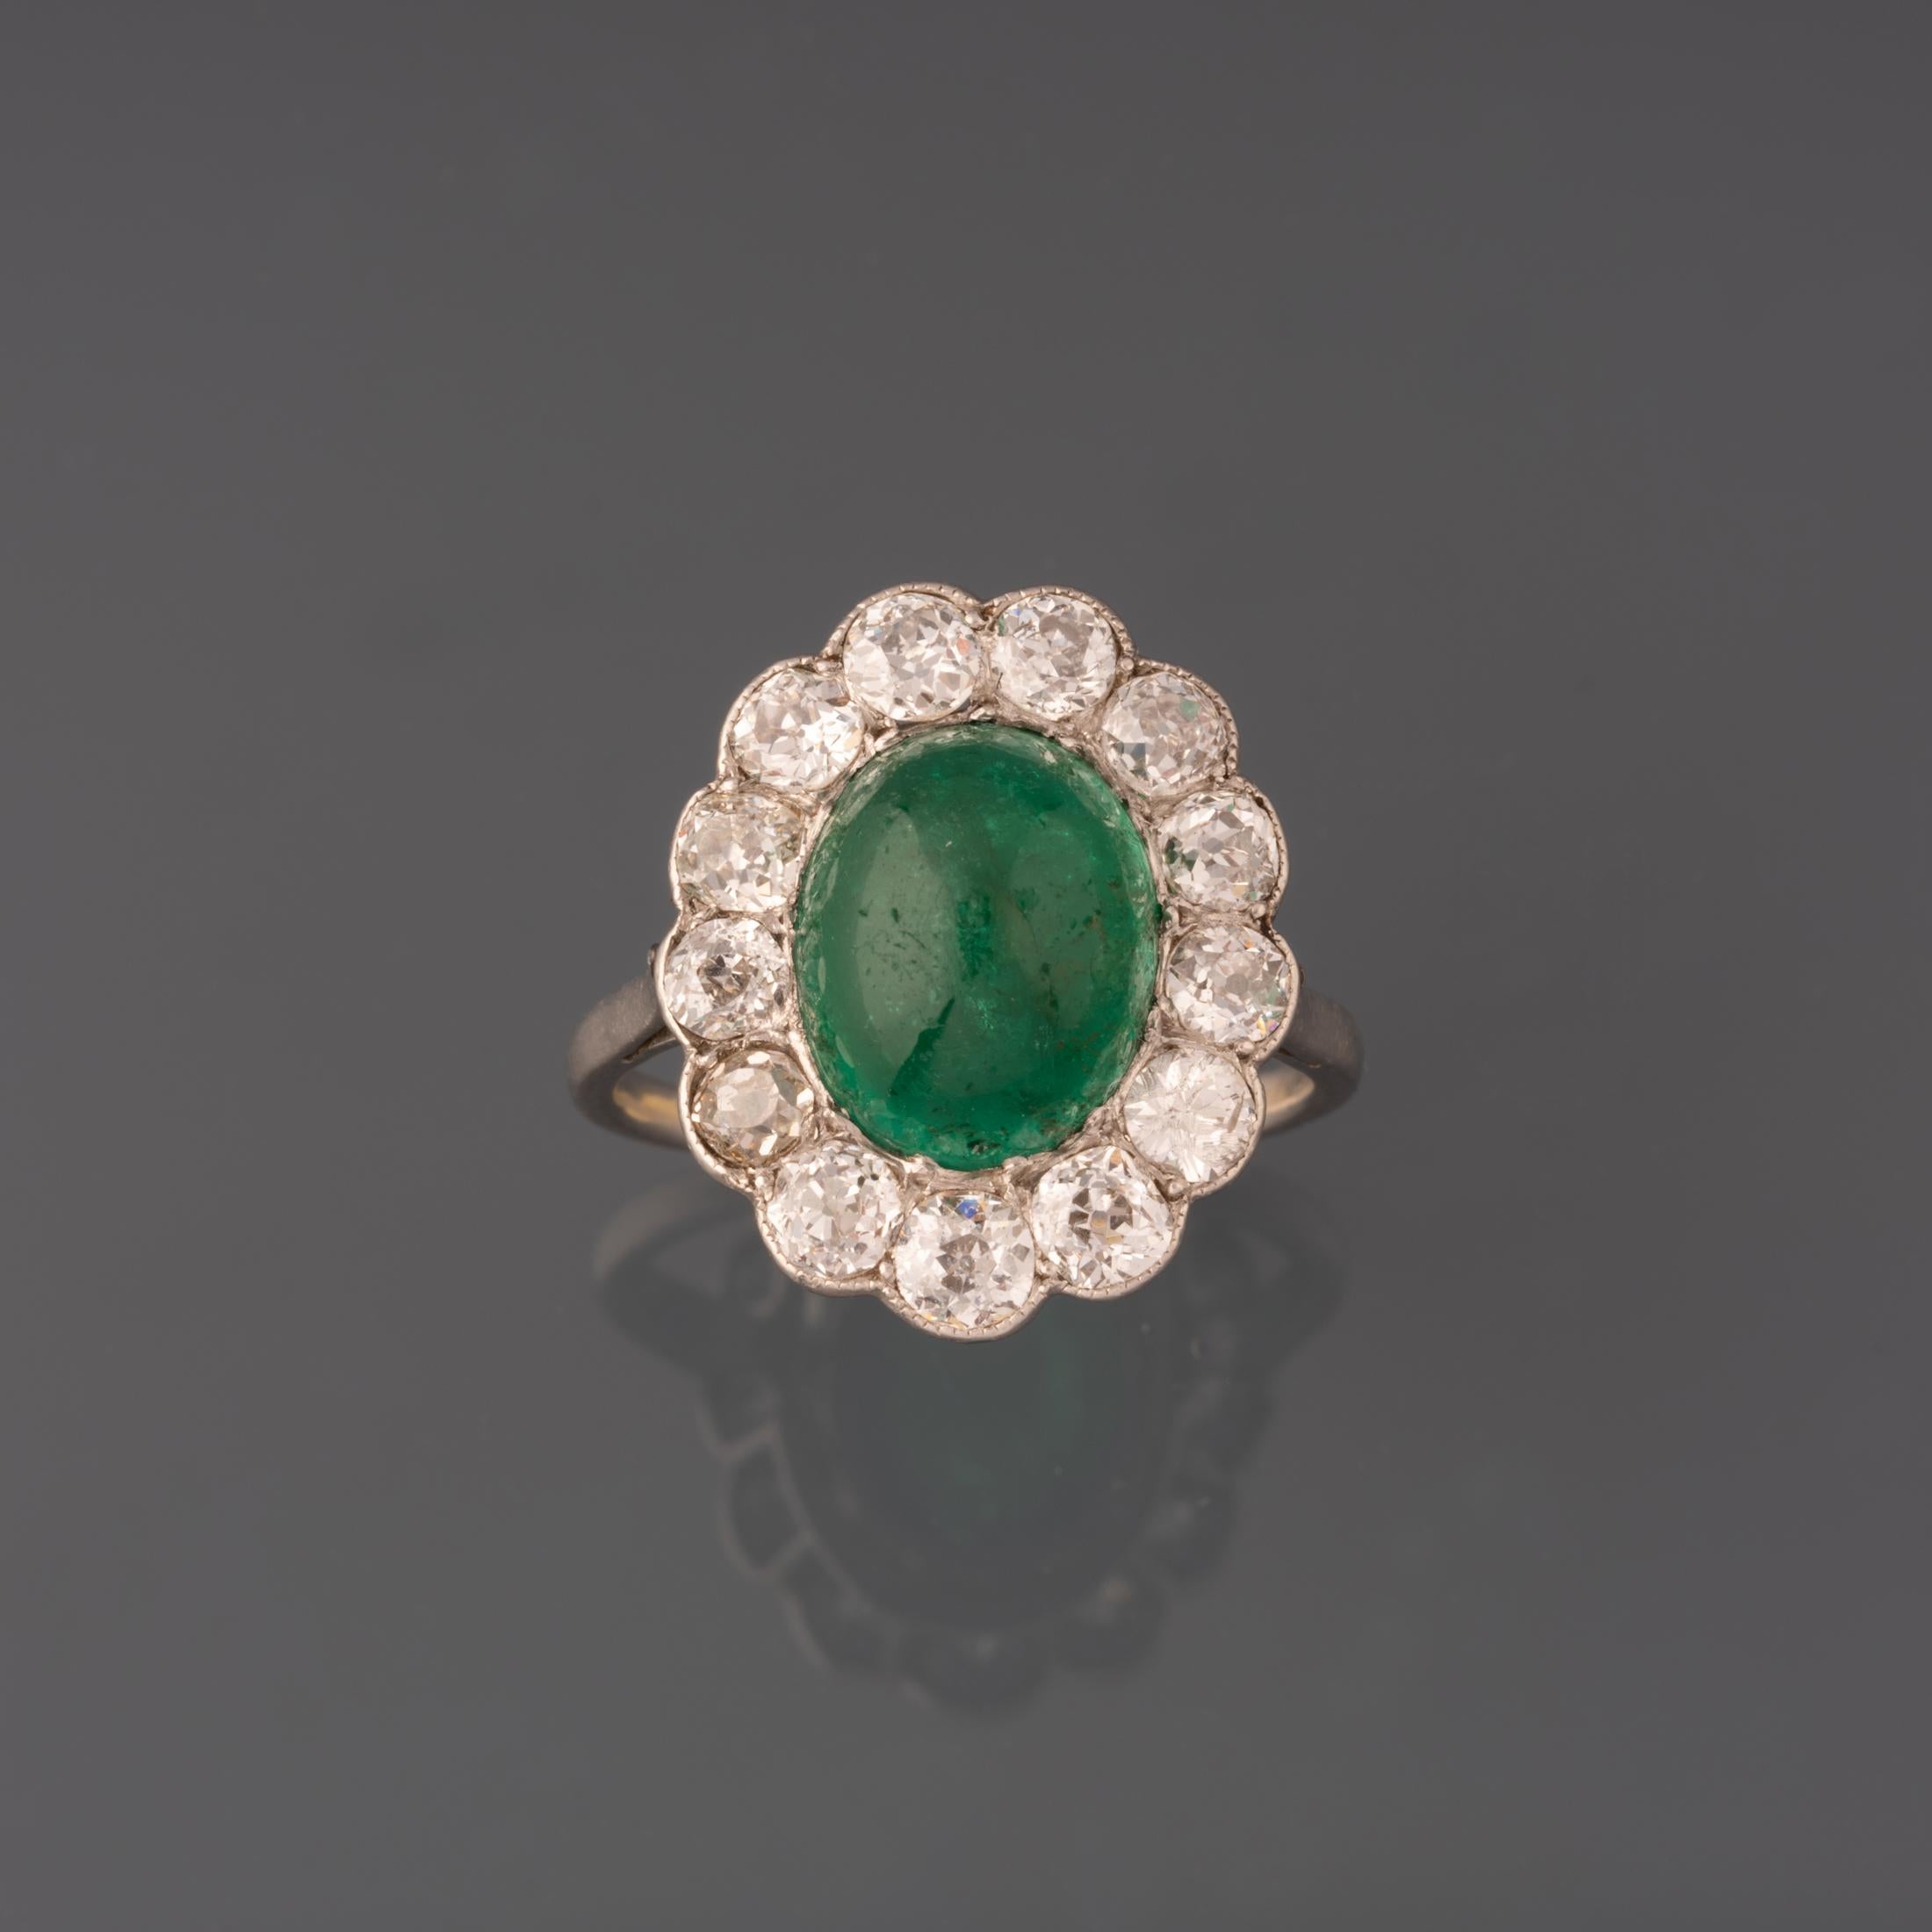 A very beautiful antique ring, made in France circa 1910.

Made in platinum and set with diamonds and an approximately 4 carats emerald cabochon.

The diamonds weights 1.90 Carats approximately (13*0.15).

Dimension of cluster: 20*16mm.

Weight: